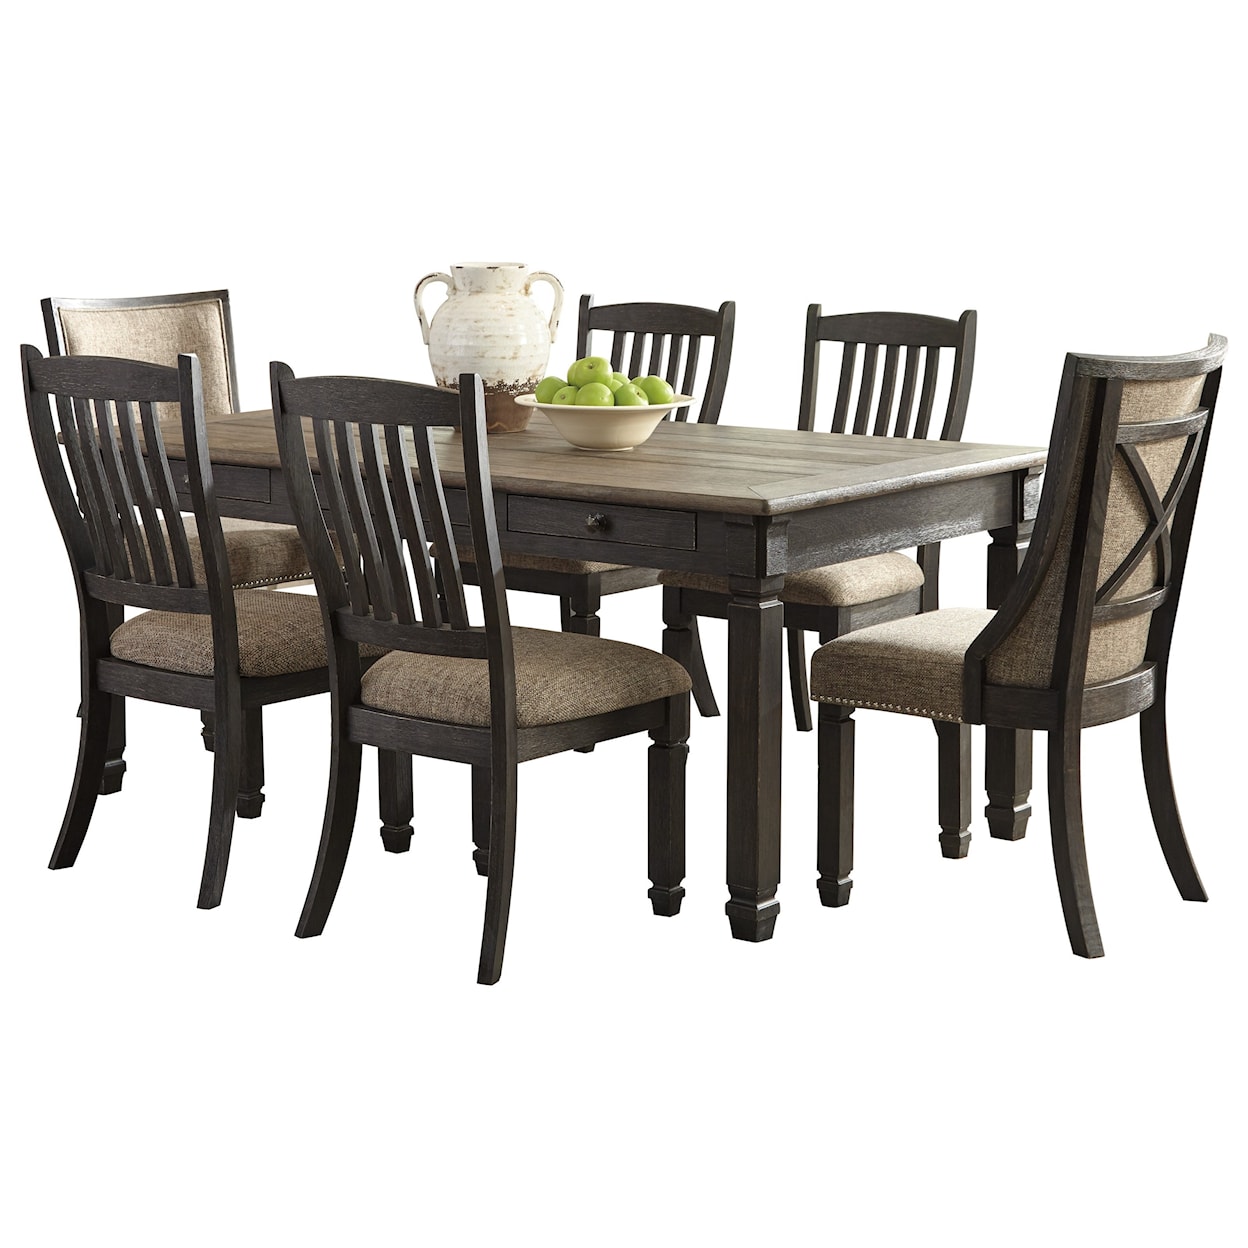 Signature Design by Ashley Furniture Tyler Creek Rectangular Dining Room Table